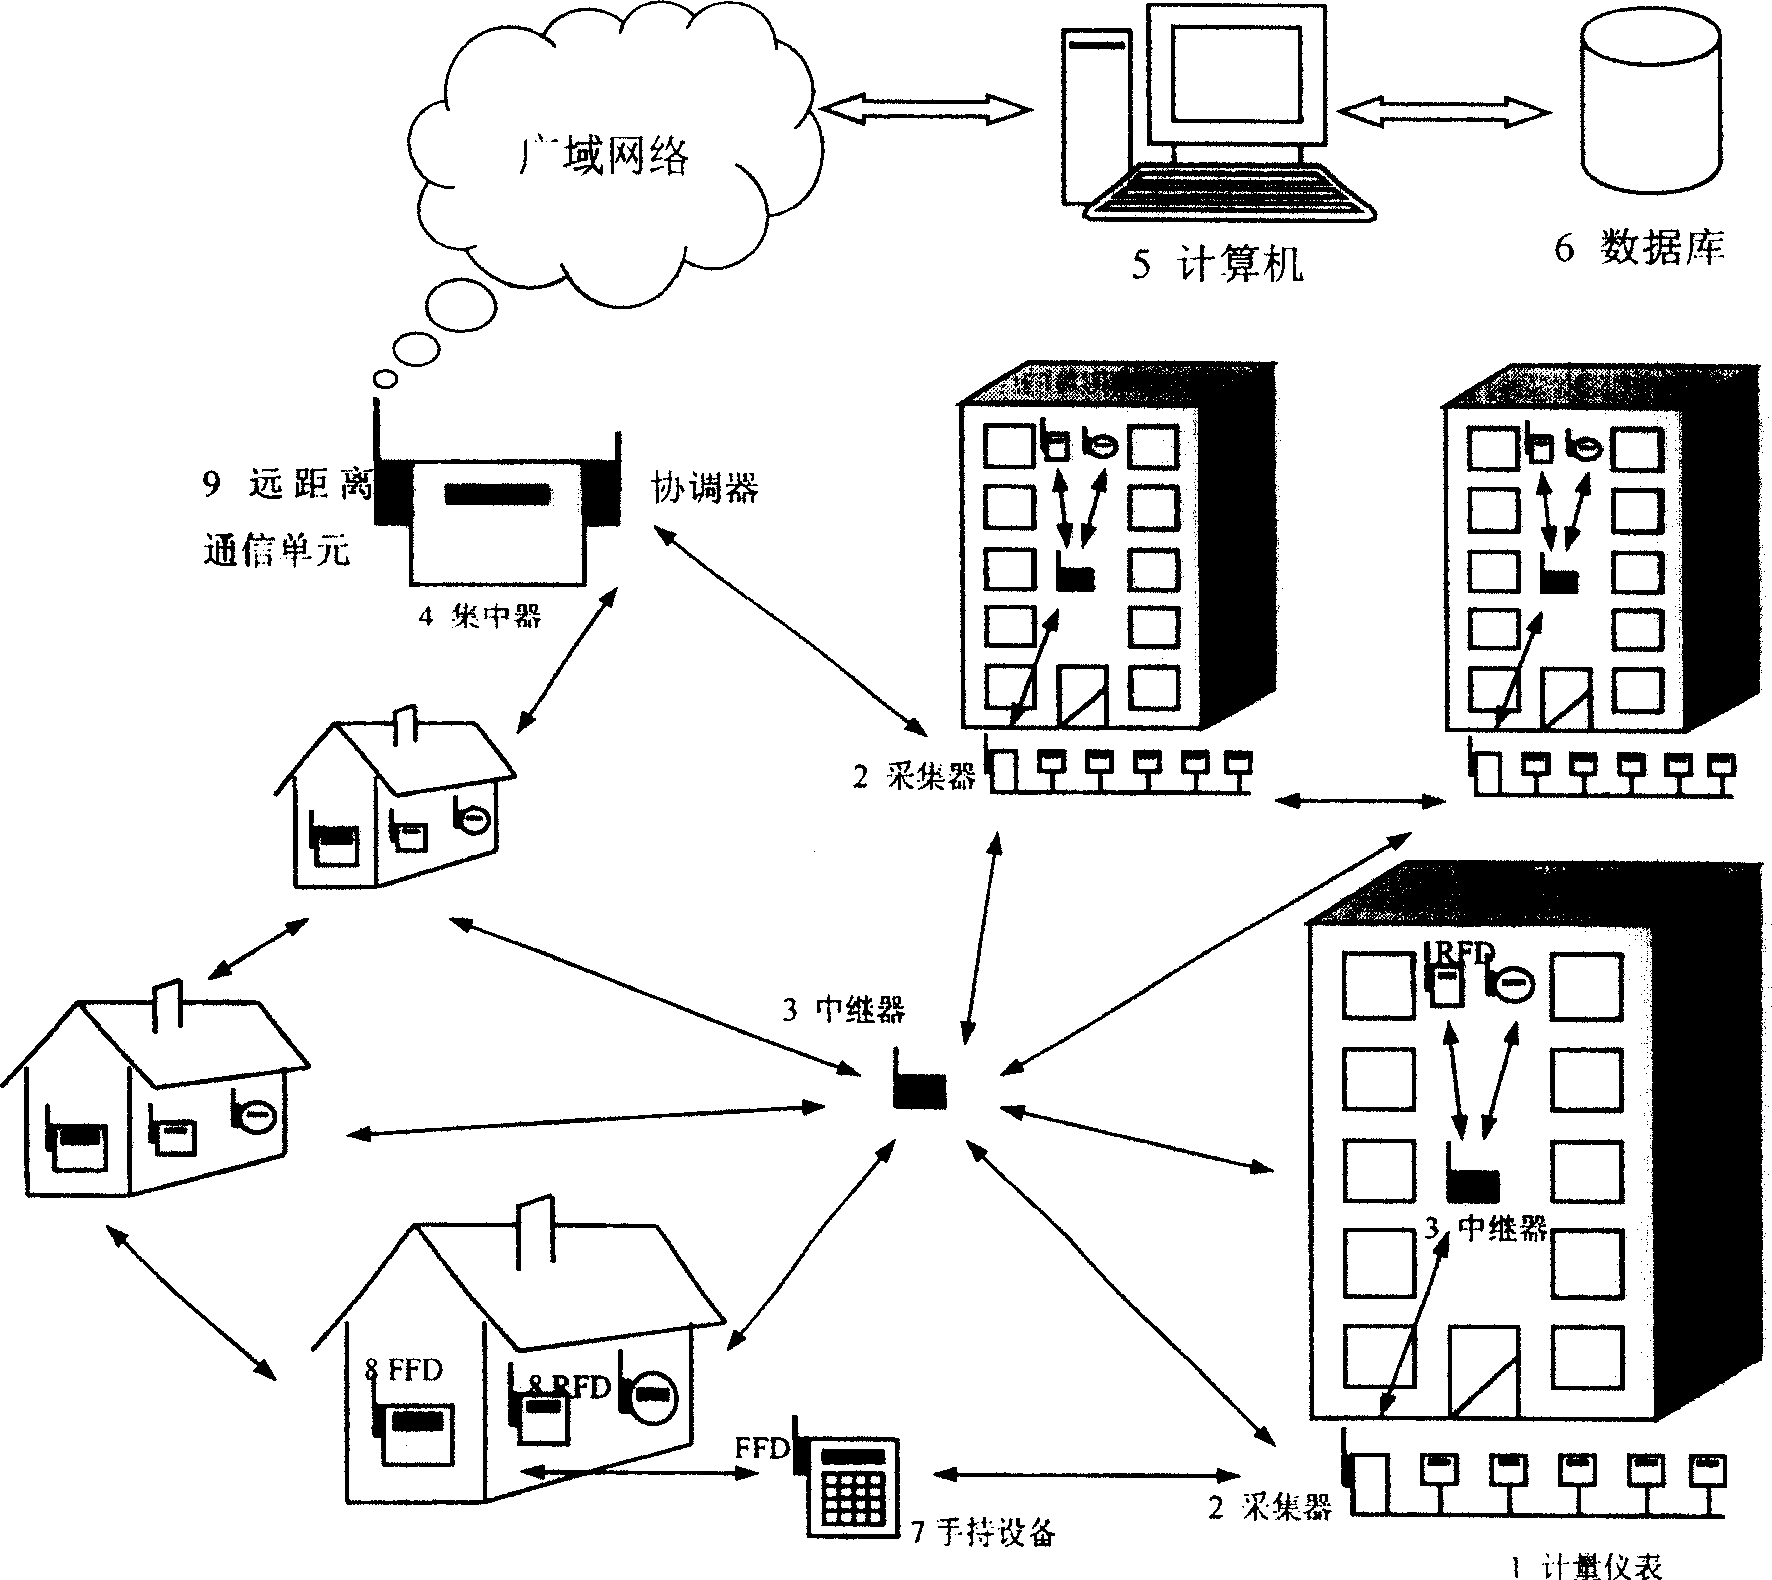 Automatic meter reading system based on ZigBee technology